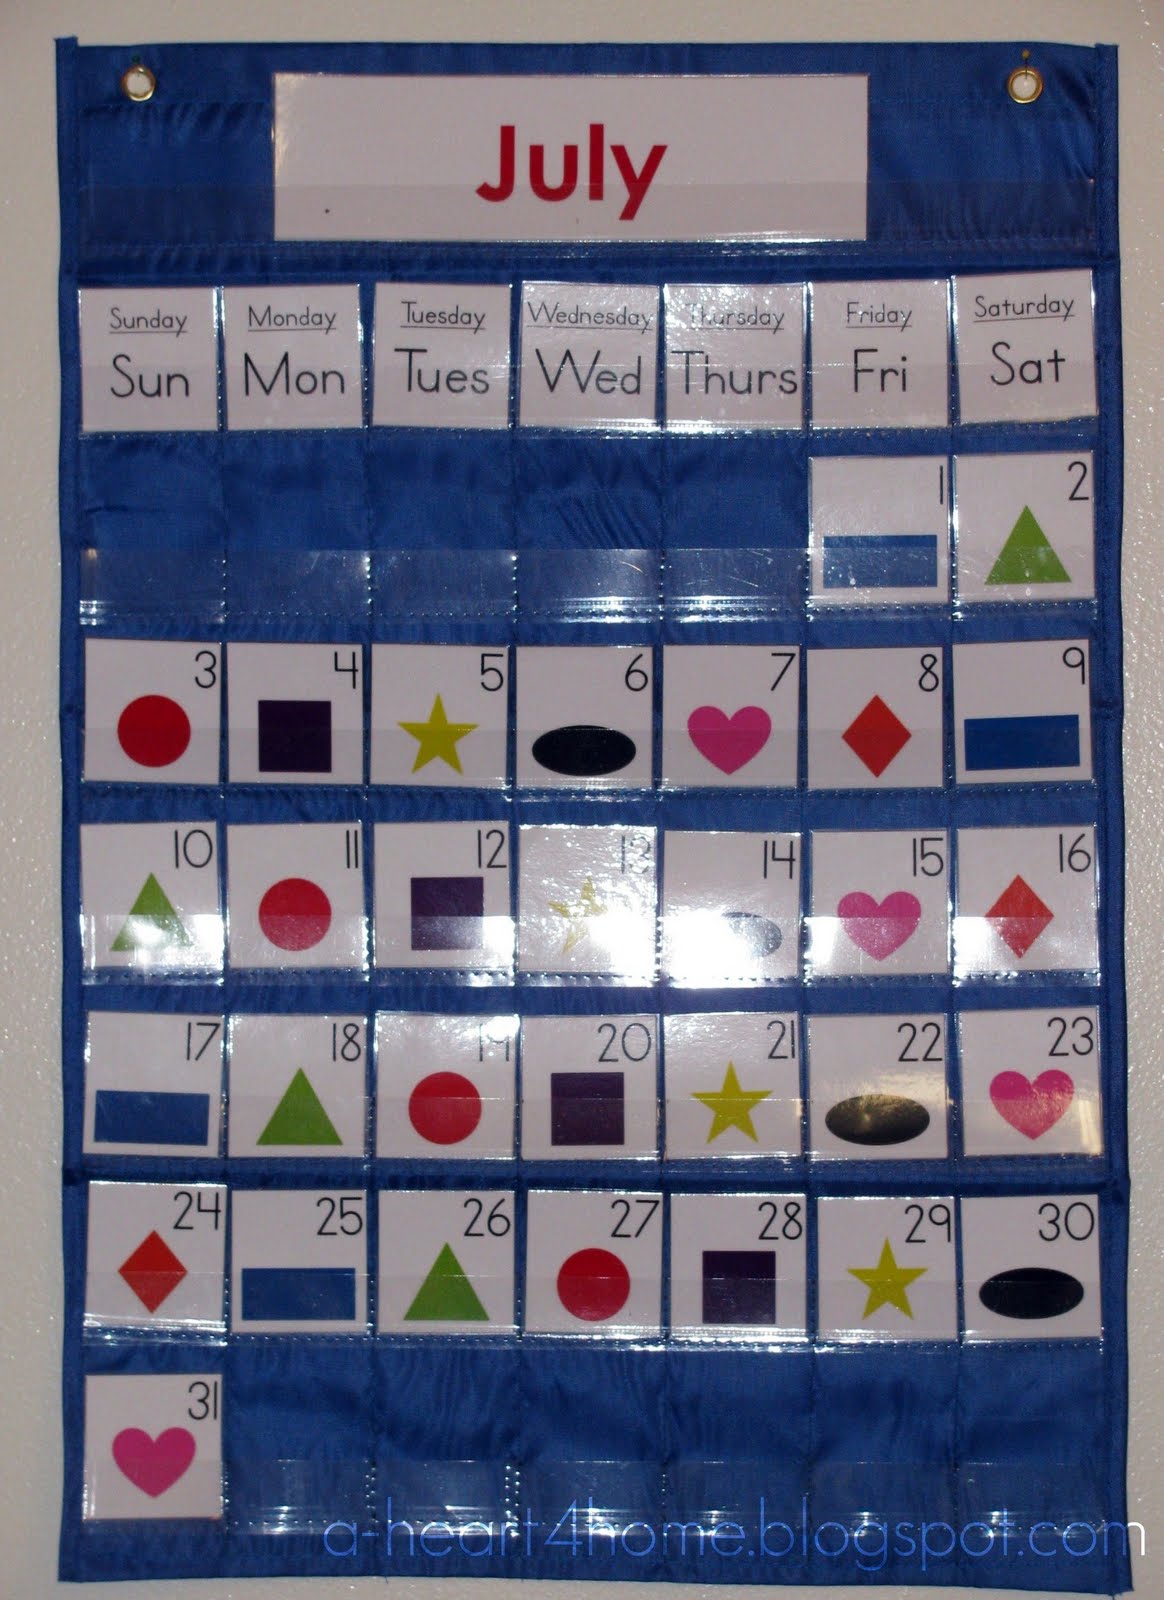 A Heart For Home: Sew Your Own Pocket Chart Calendar from a $1 Target